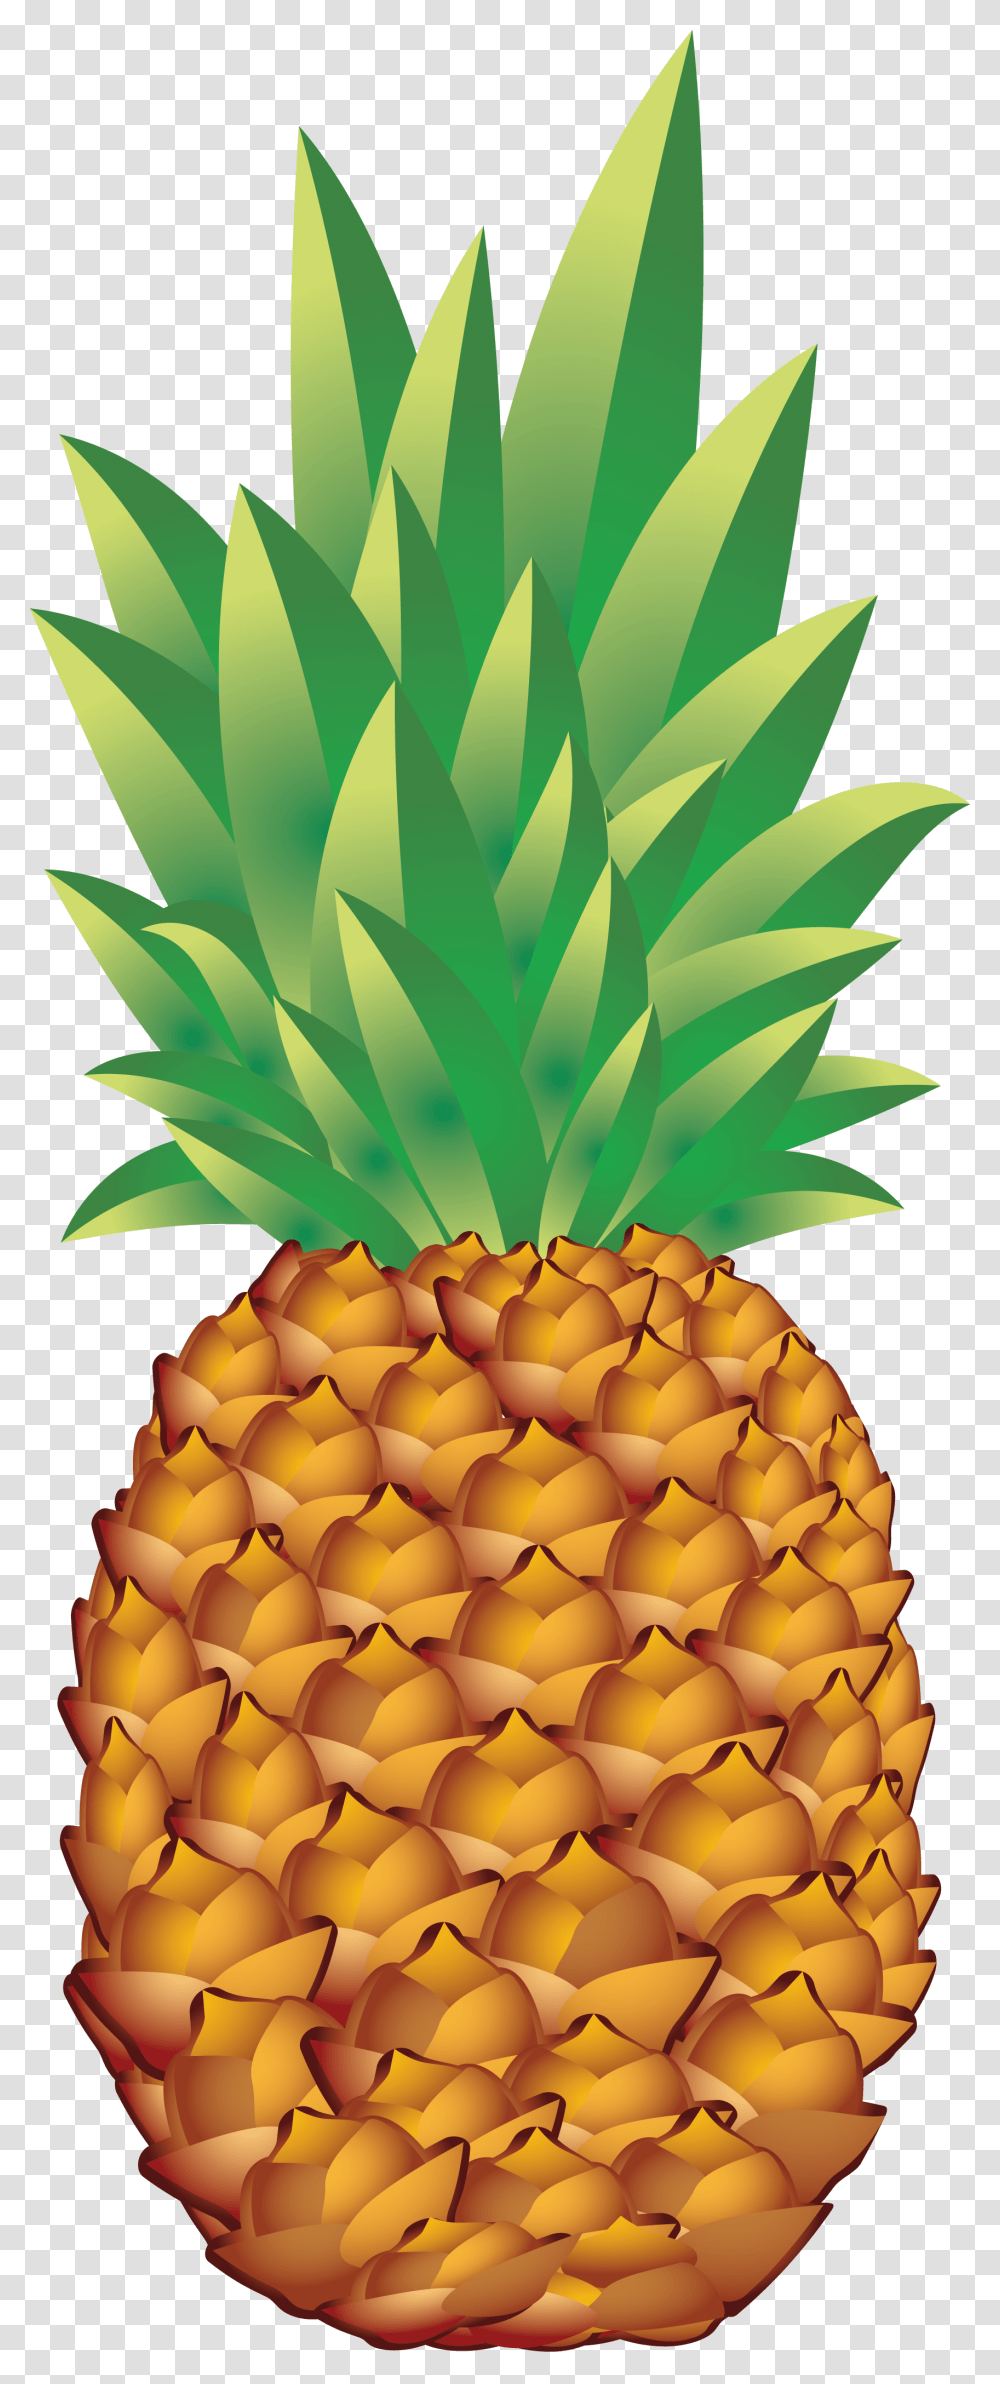 Pineapple Image Free Download Pineapple, Plant, Fruit, Food Transparent Png